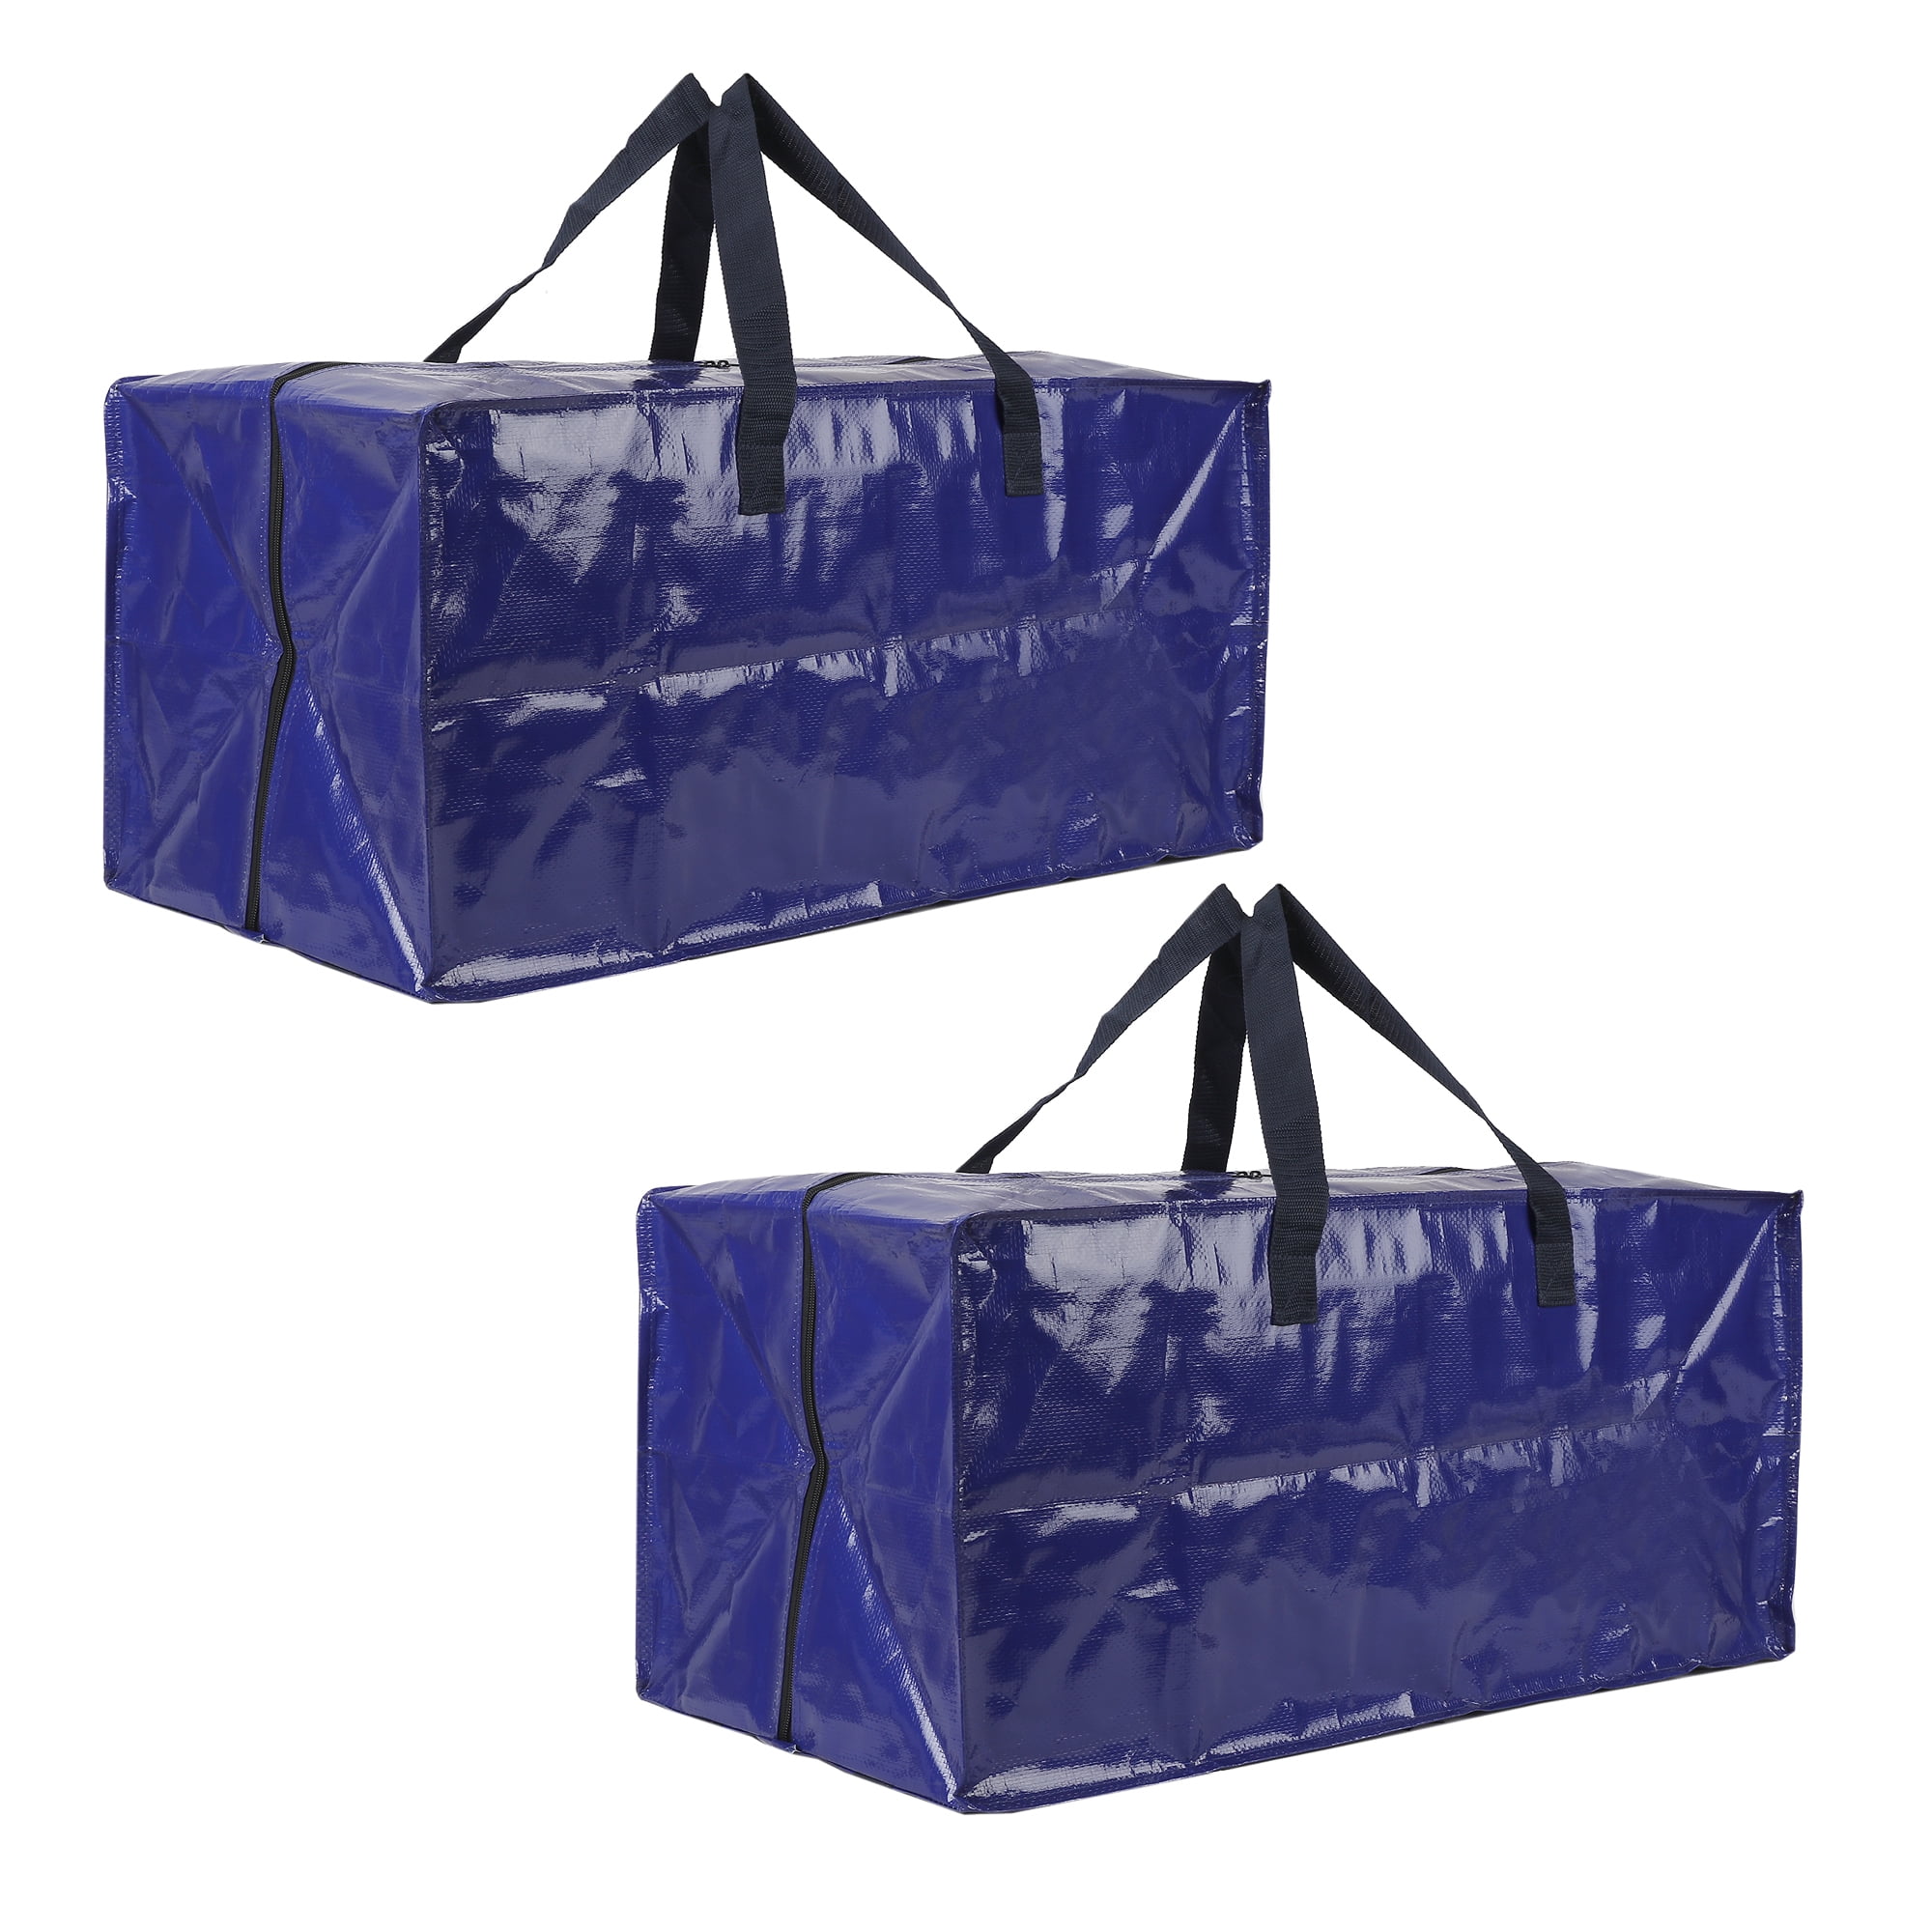 BAG-THAT! 5 Moving Bags Heavy Duty Extra Large Stronger Handles